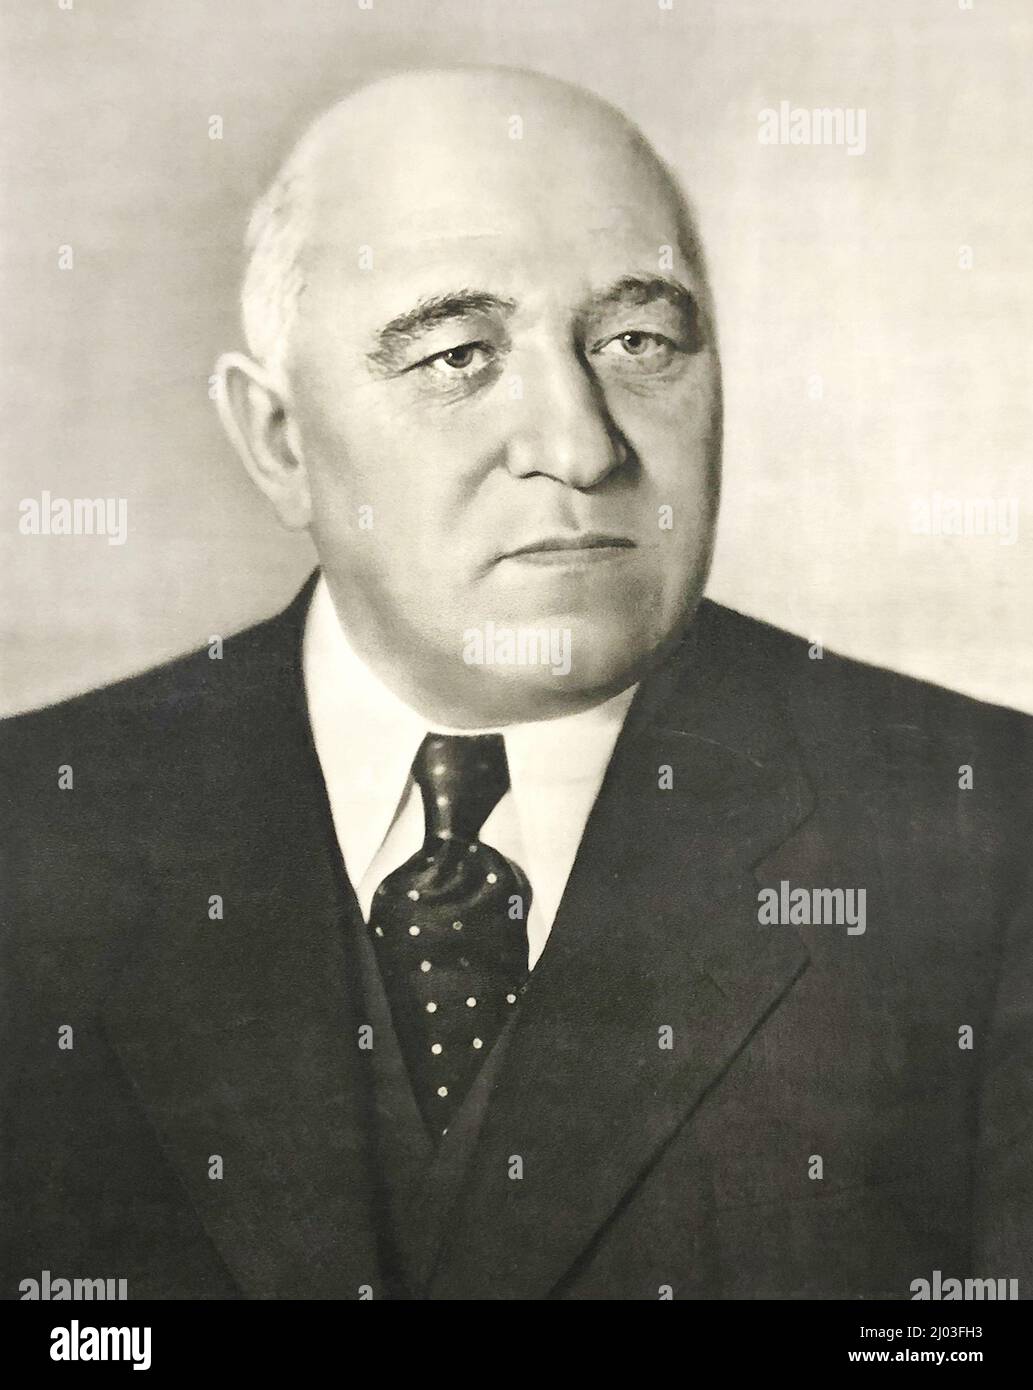 Photo portrait of Matyas Rakosi. Mátyás Rákosi (1892 – 1971) was a Hungarian communist politician who was the de facto leader of Hungary from 1947 to 1956. He served first as General Secretary of the Hungarian Communist Party from 1945 to 1948 and then as General Secretary (later renamed First Secretary) of the Hungarian Working People's Party from 1948 to 1956. Stock Photo